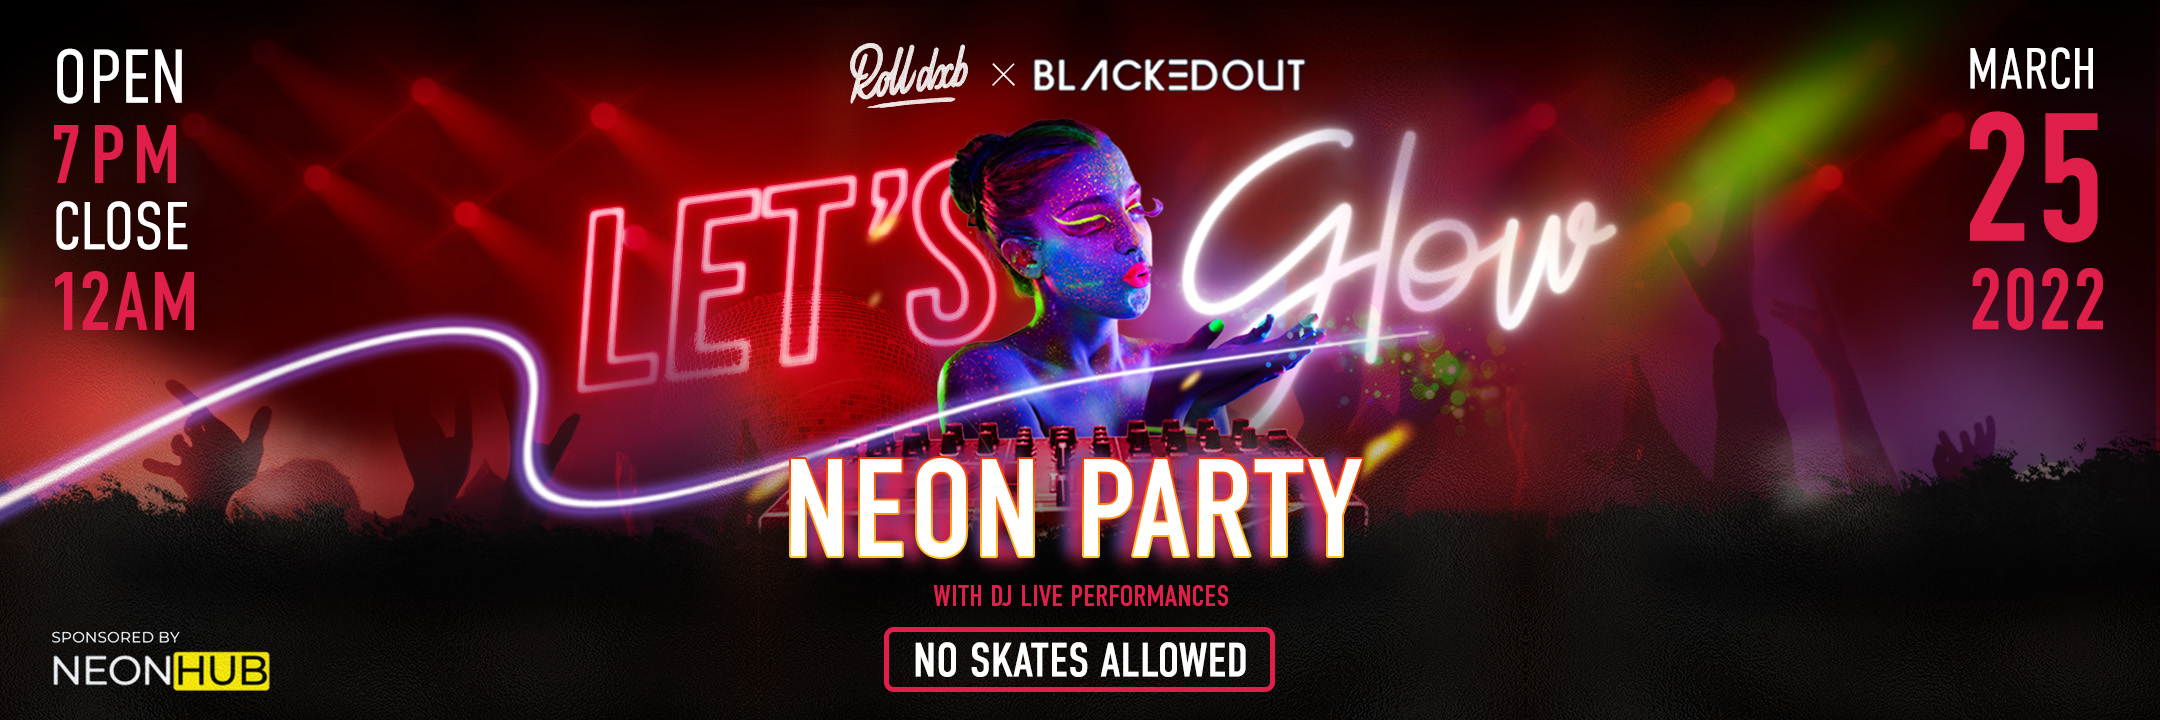 NEON PARTY BANNER